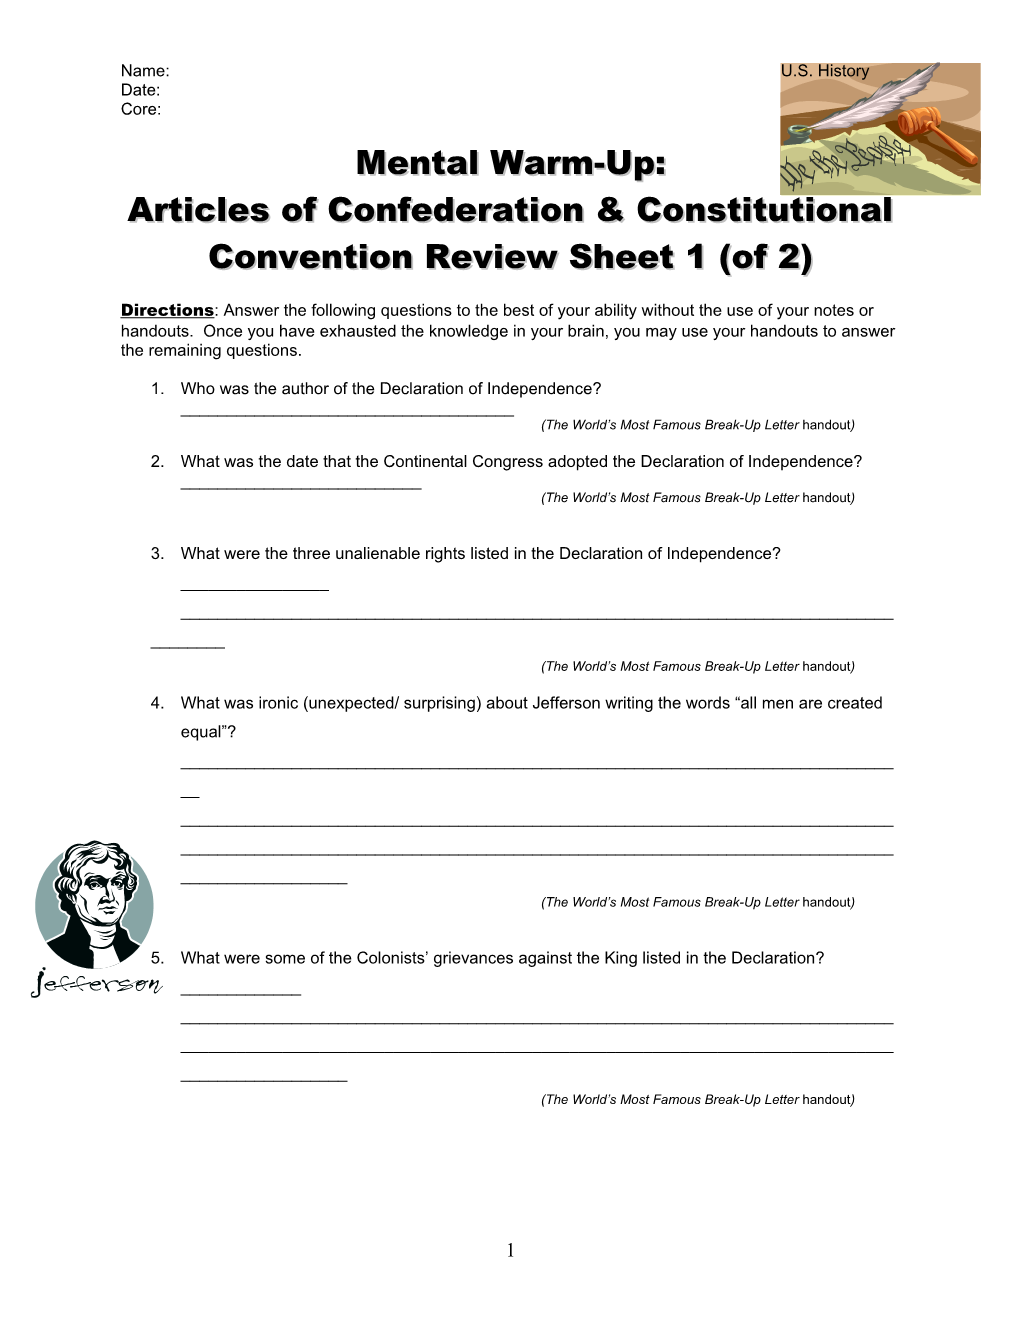 Articles of Confederation & Constitutional Convention Review Sheet 1 (Of 2)